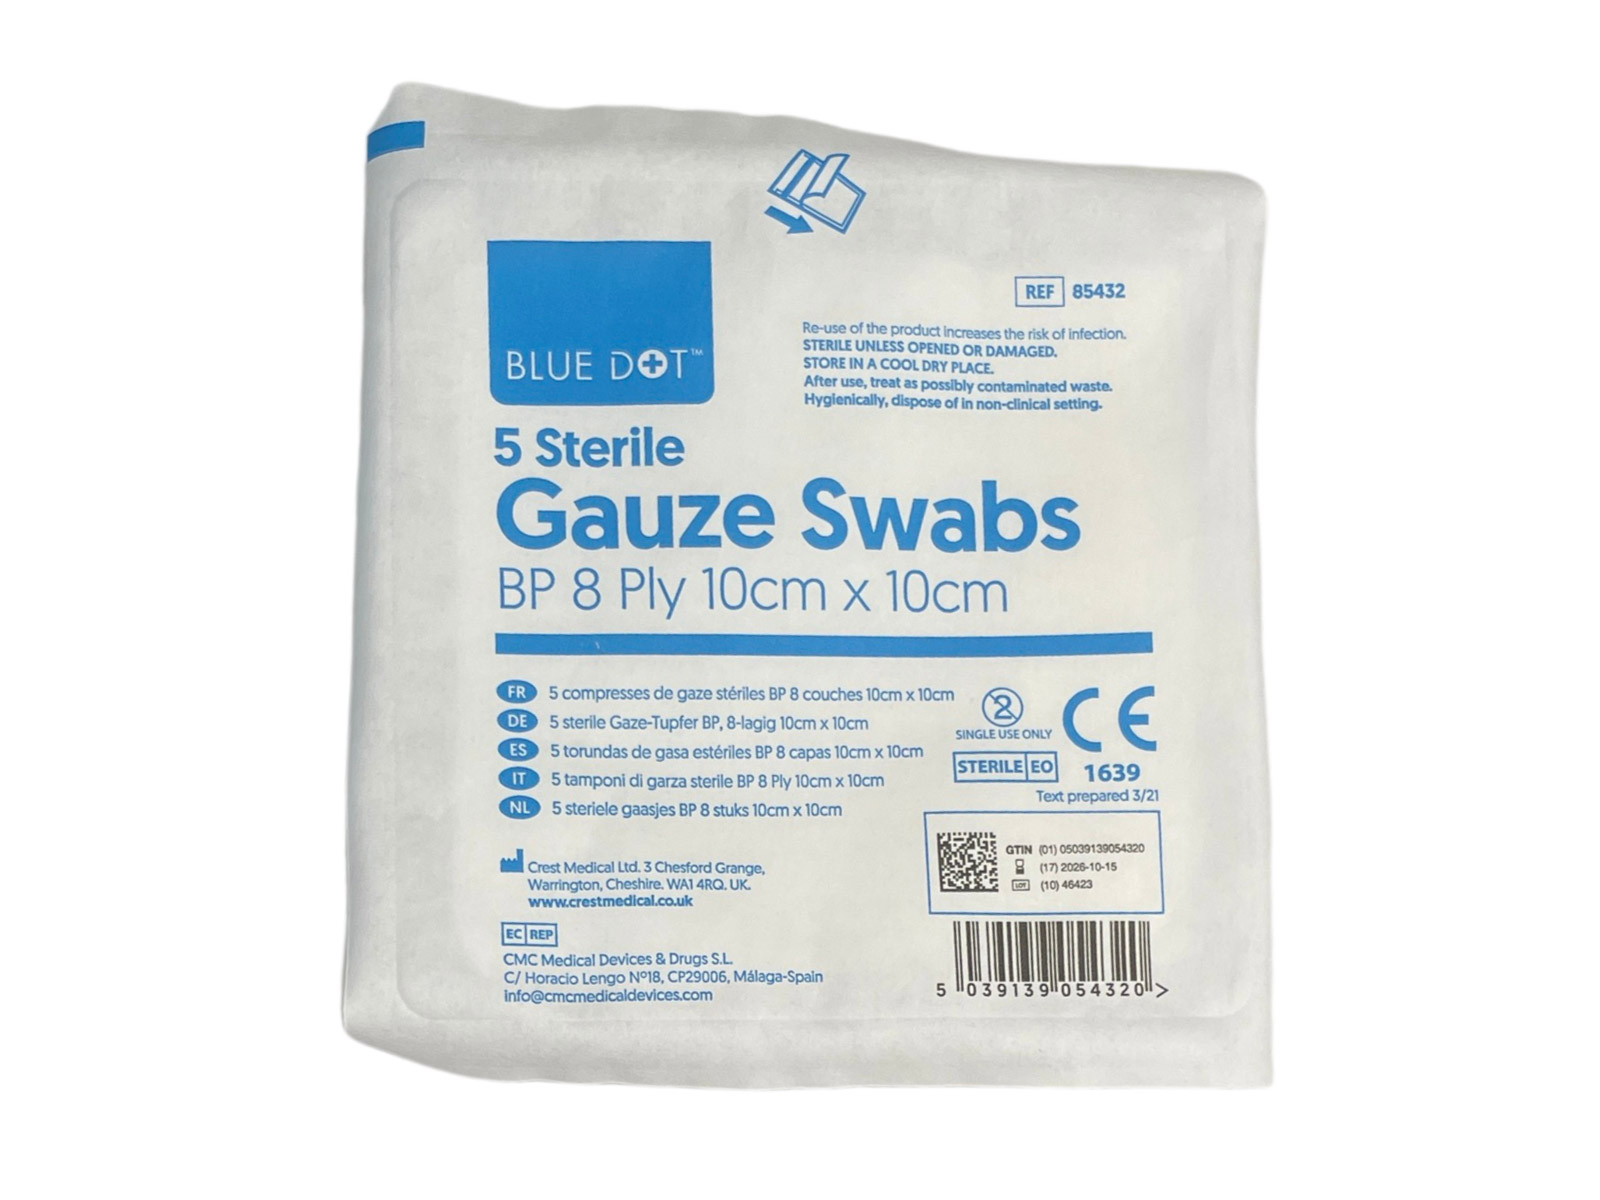 Buy Sterile Gauze Swabs - Reducing the chances of infection